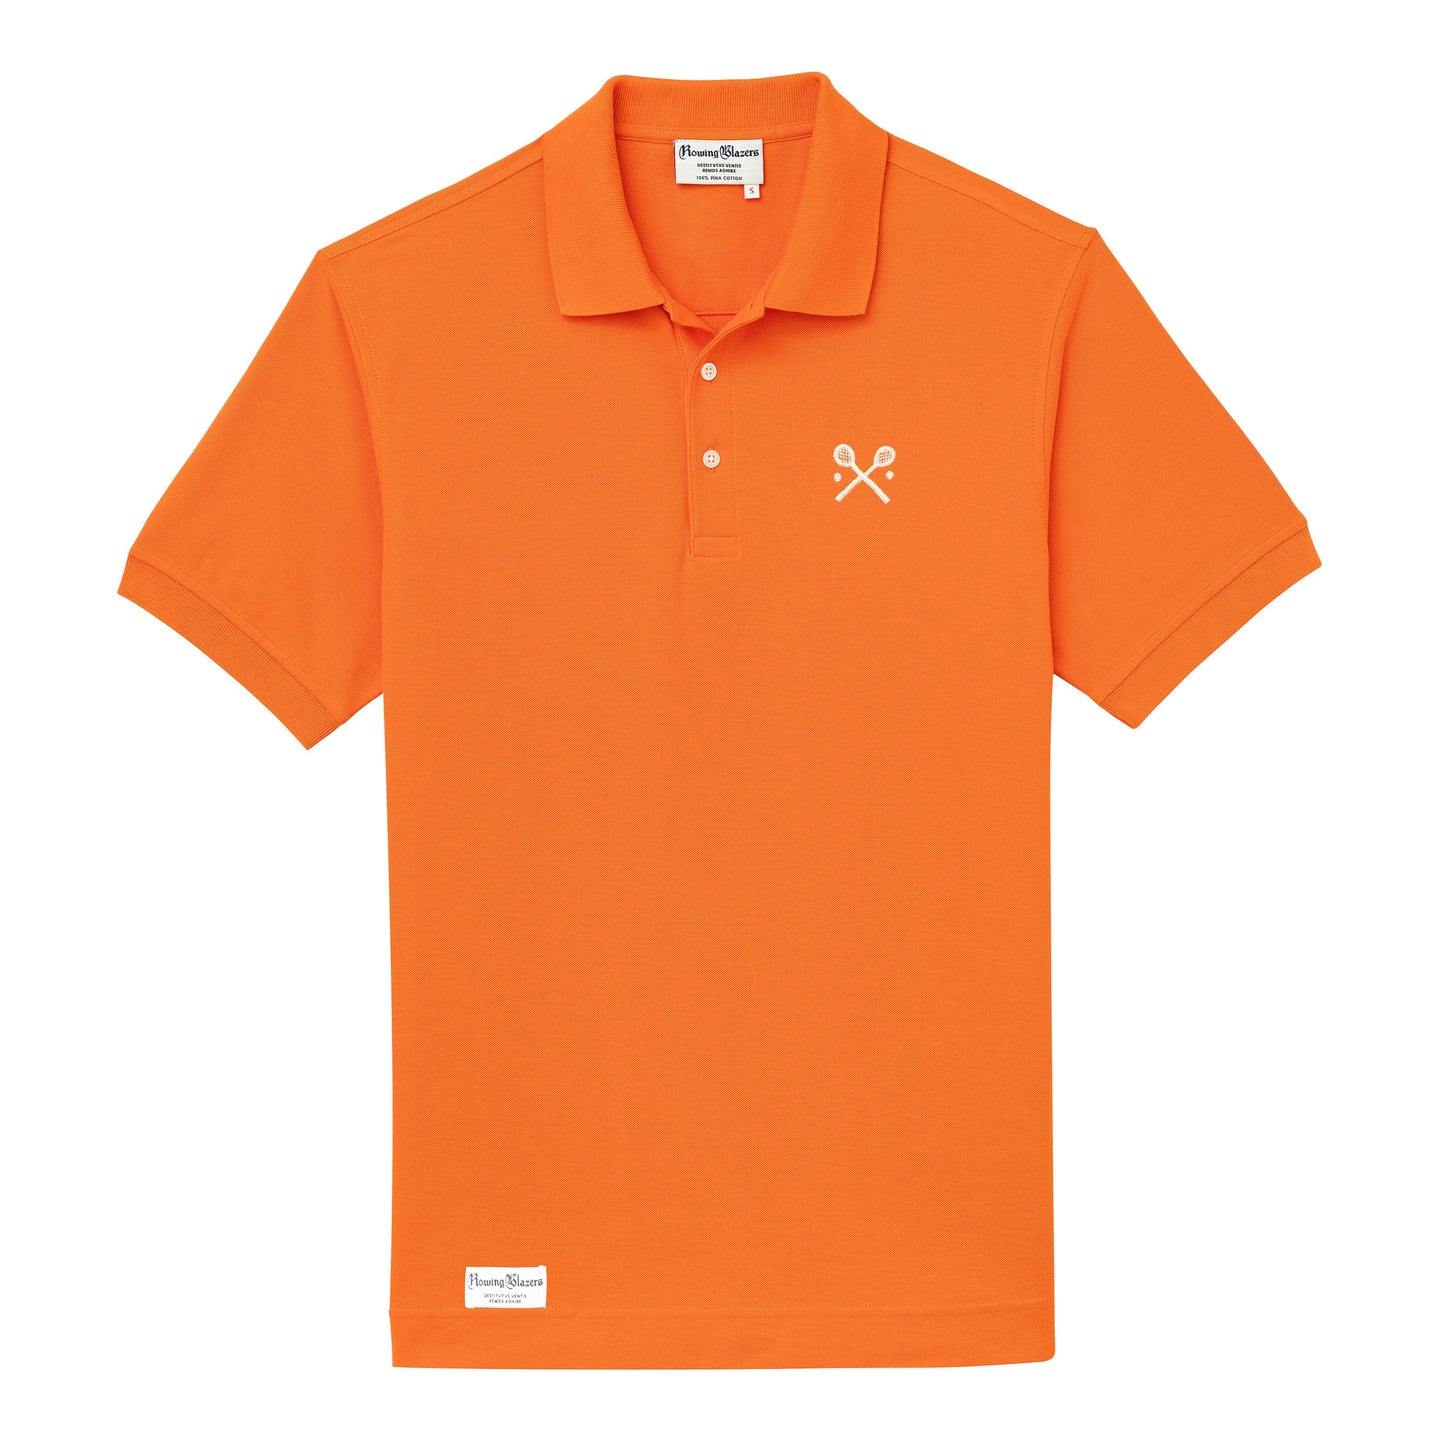 Orange polo jersey with embroidered crossed racquets motif.